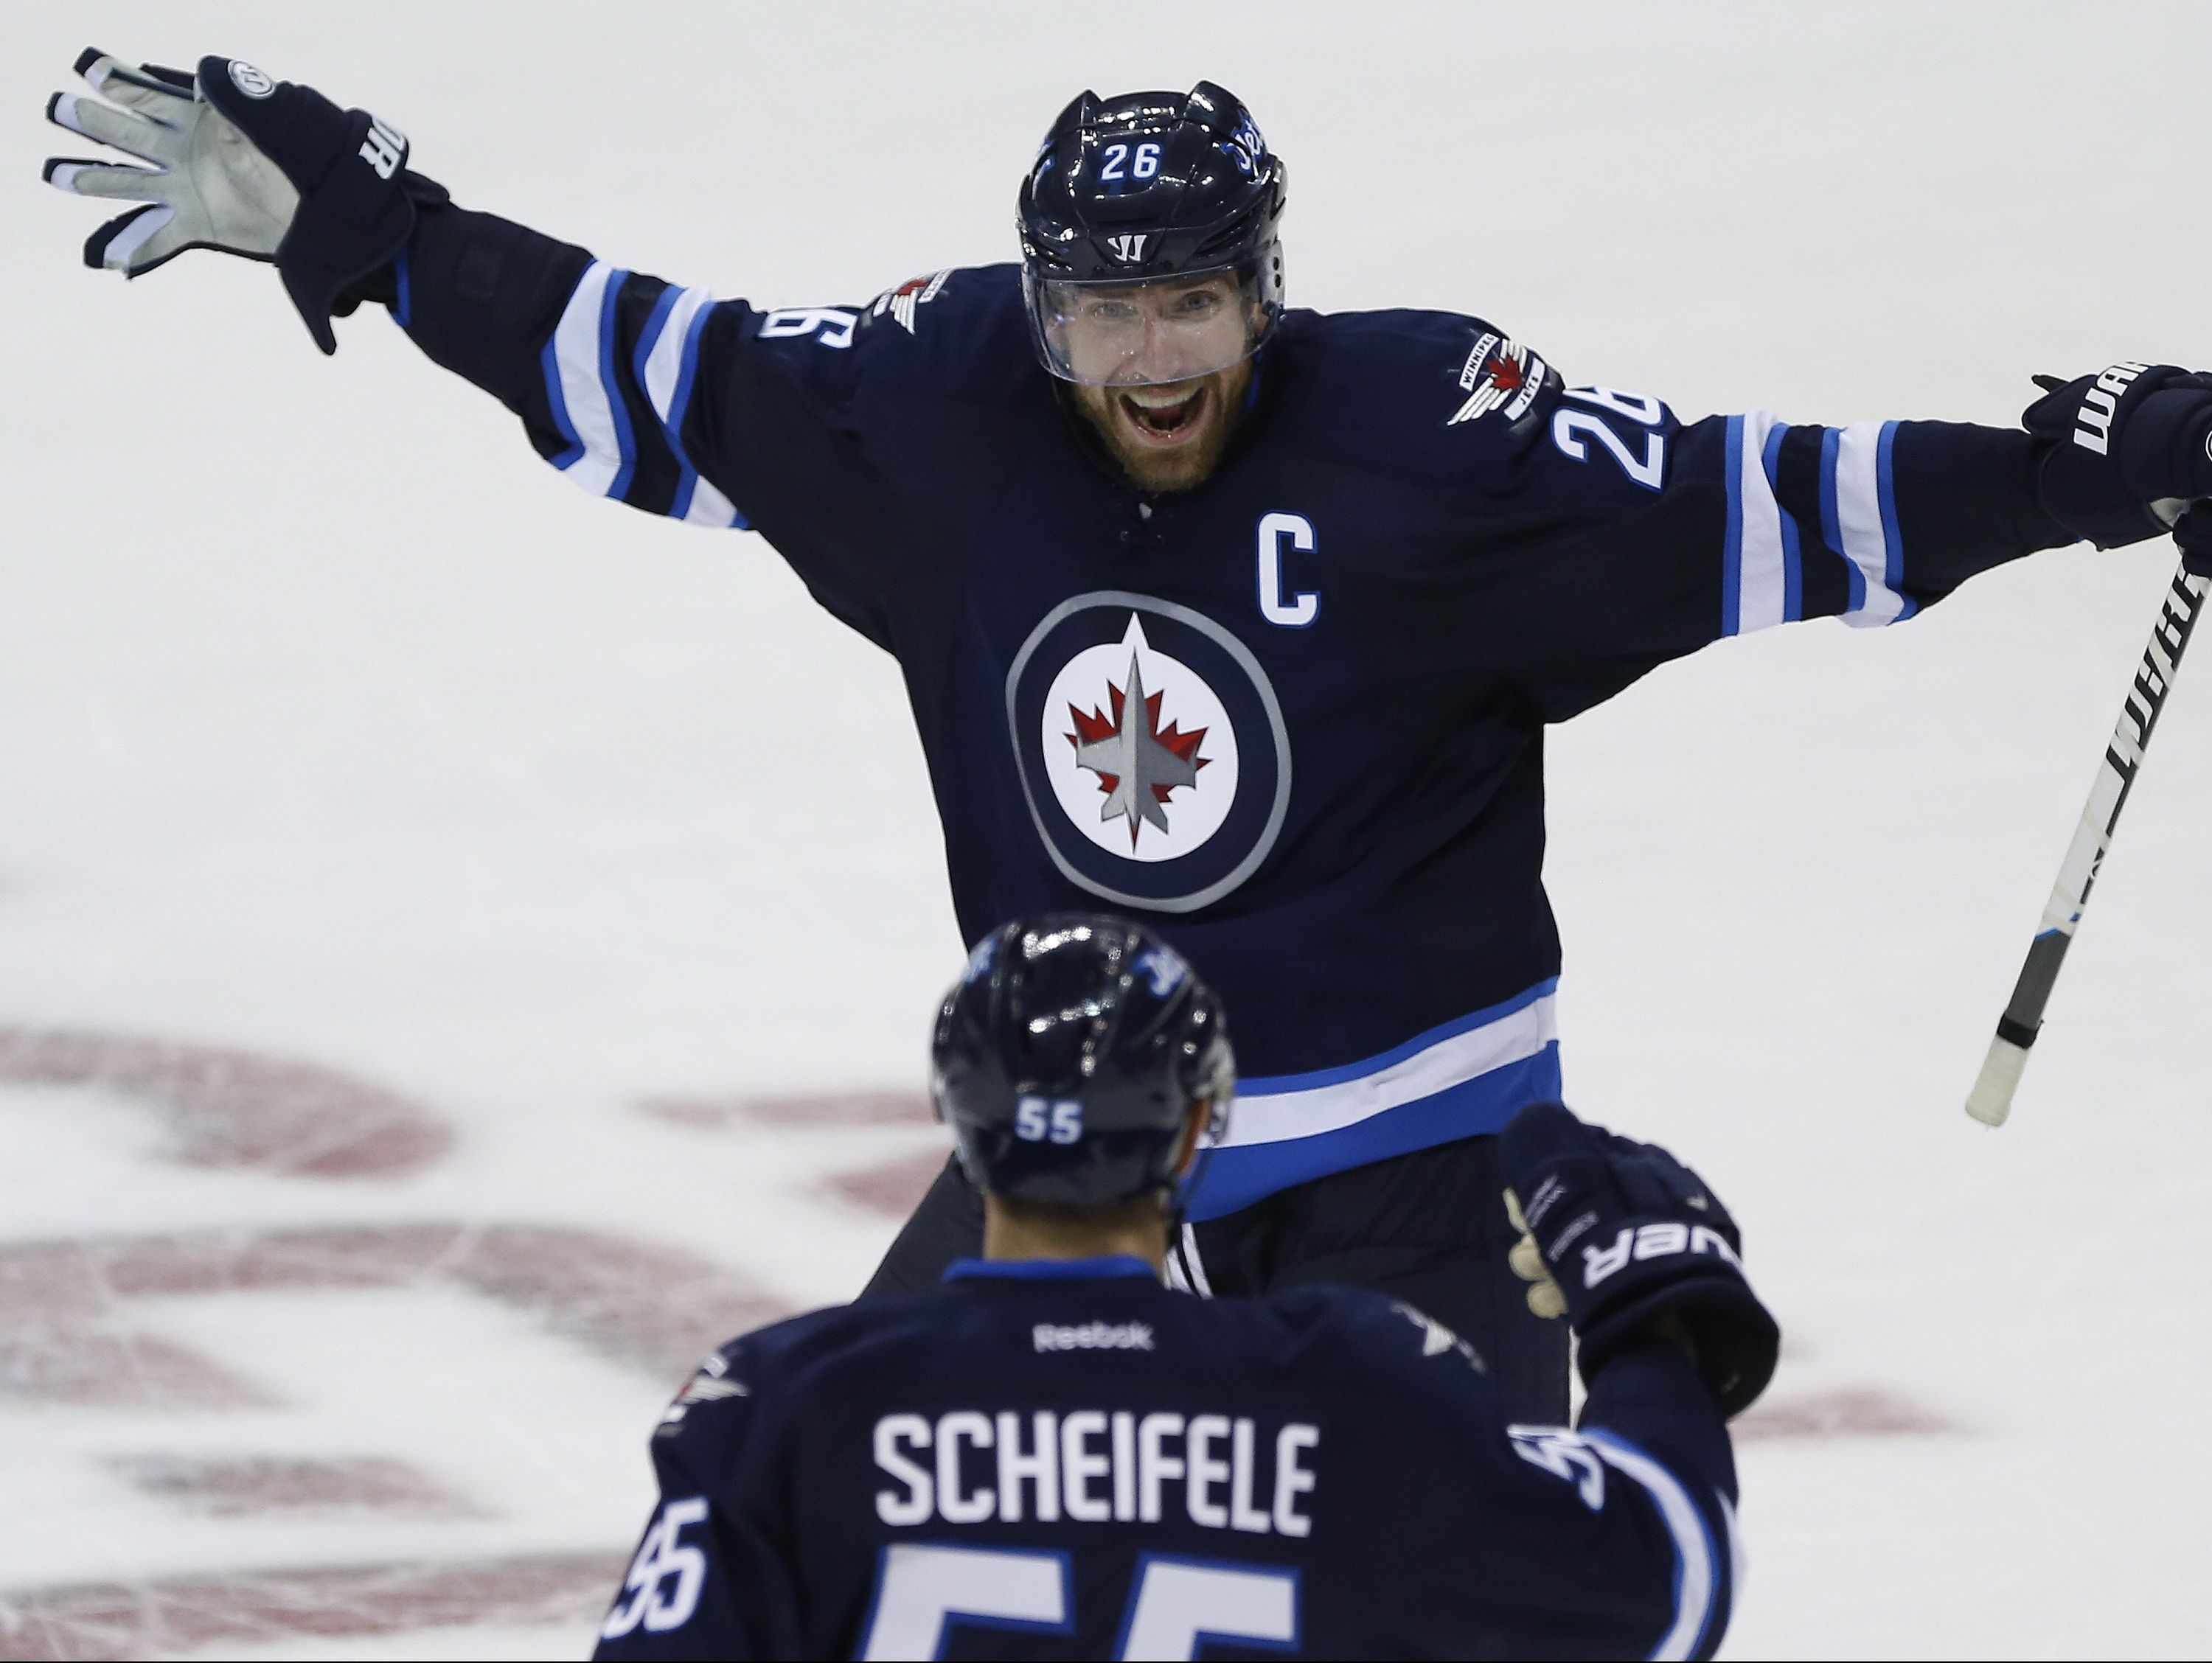 Open arms, chirps, welcome Scheifele 